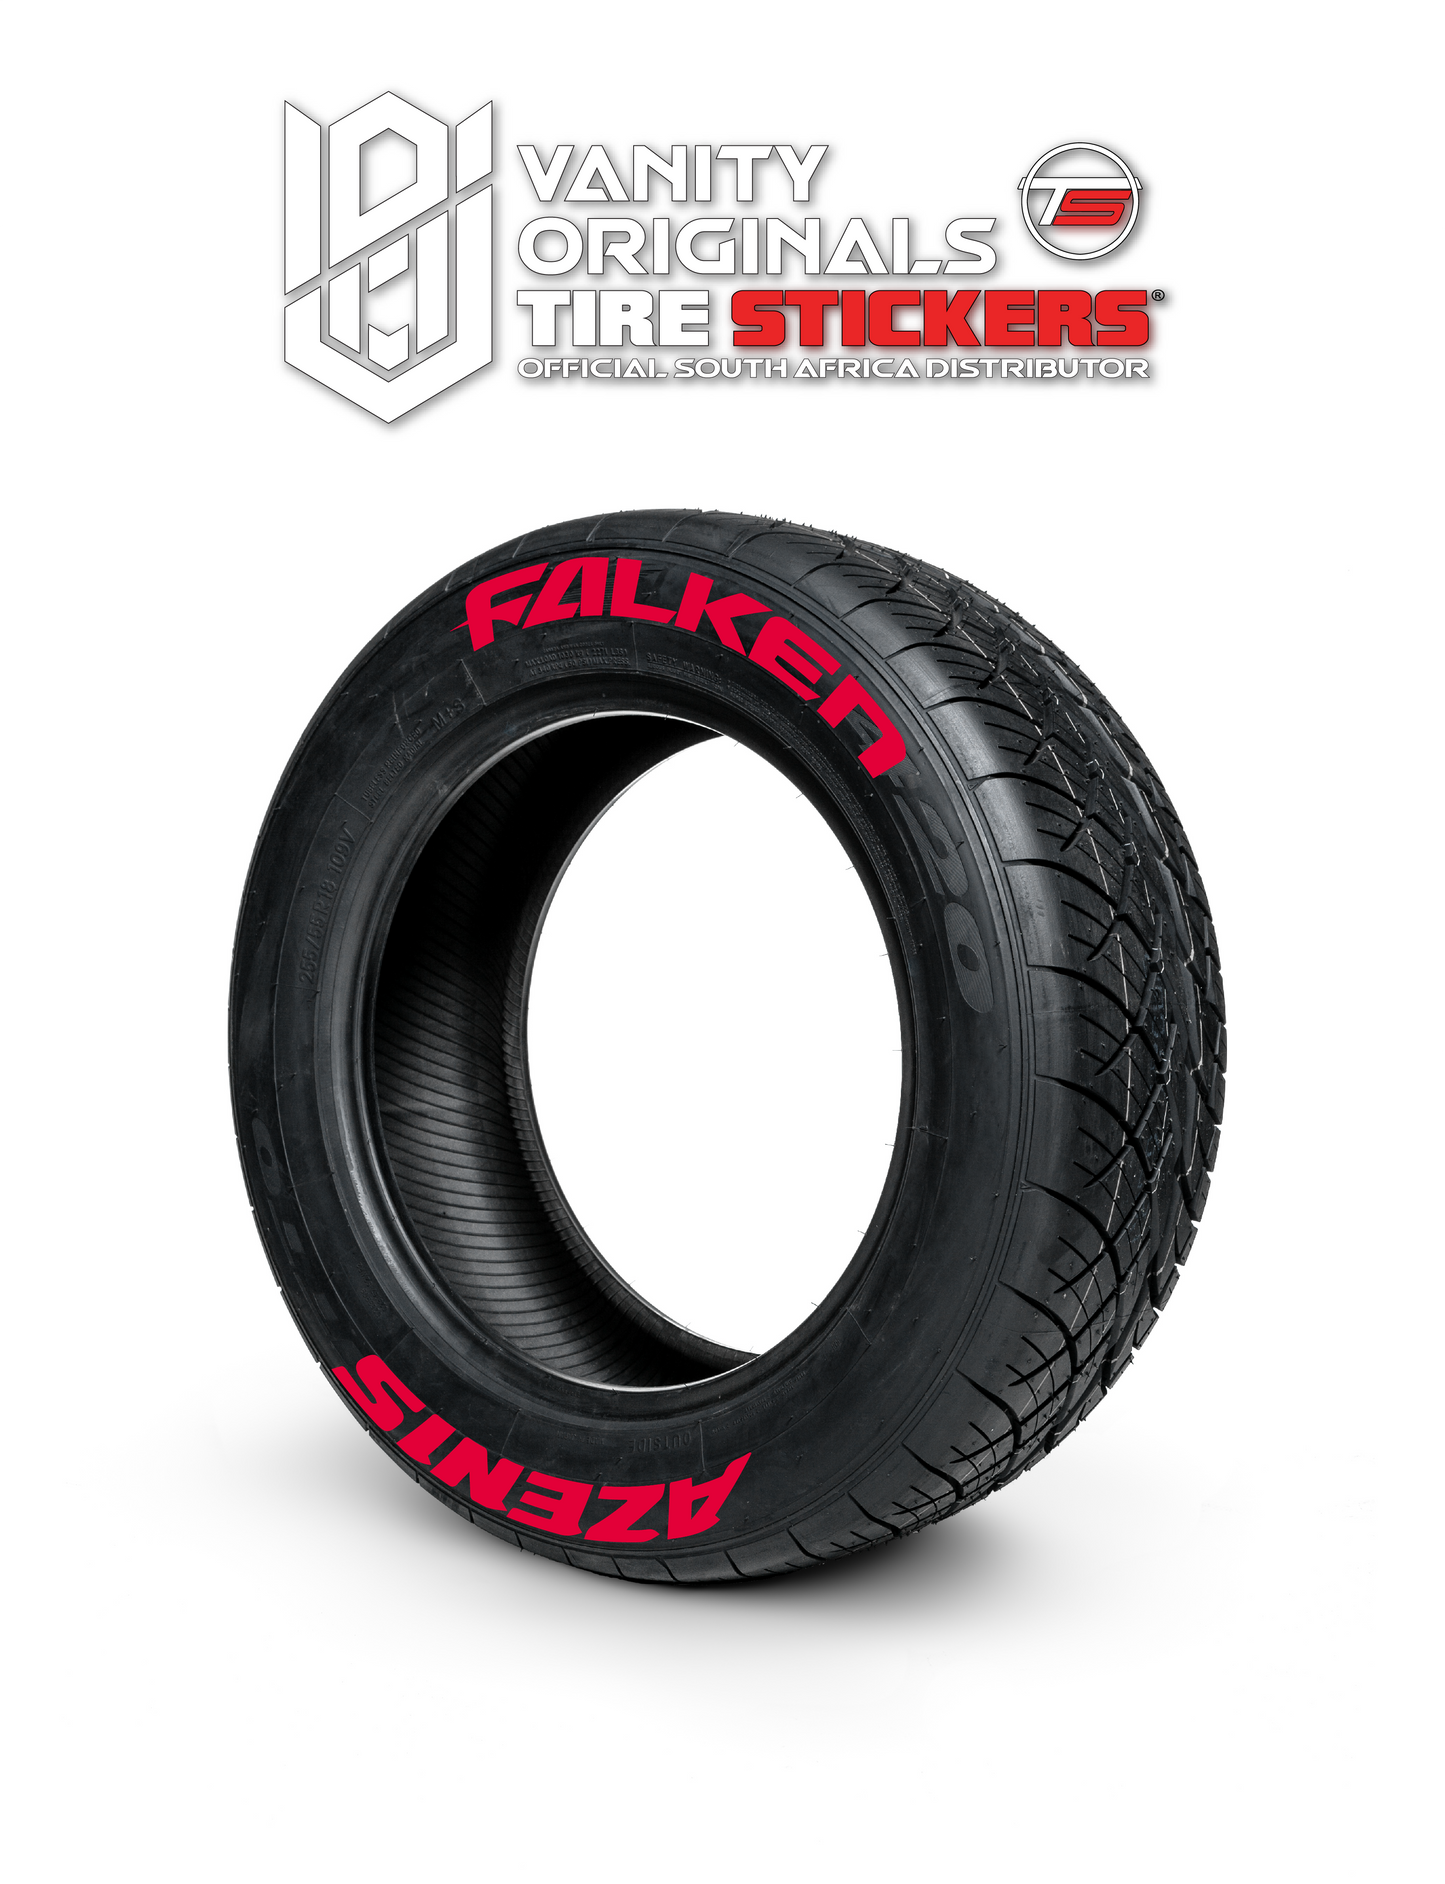 Falken Azenis ( 8x Rubber Decals, Adhesive & Instructions Included )